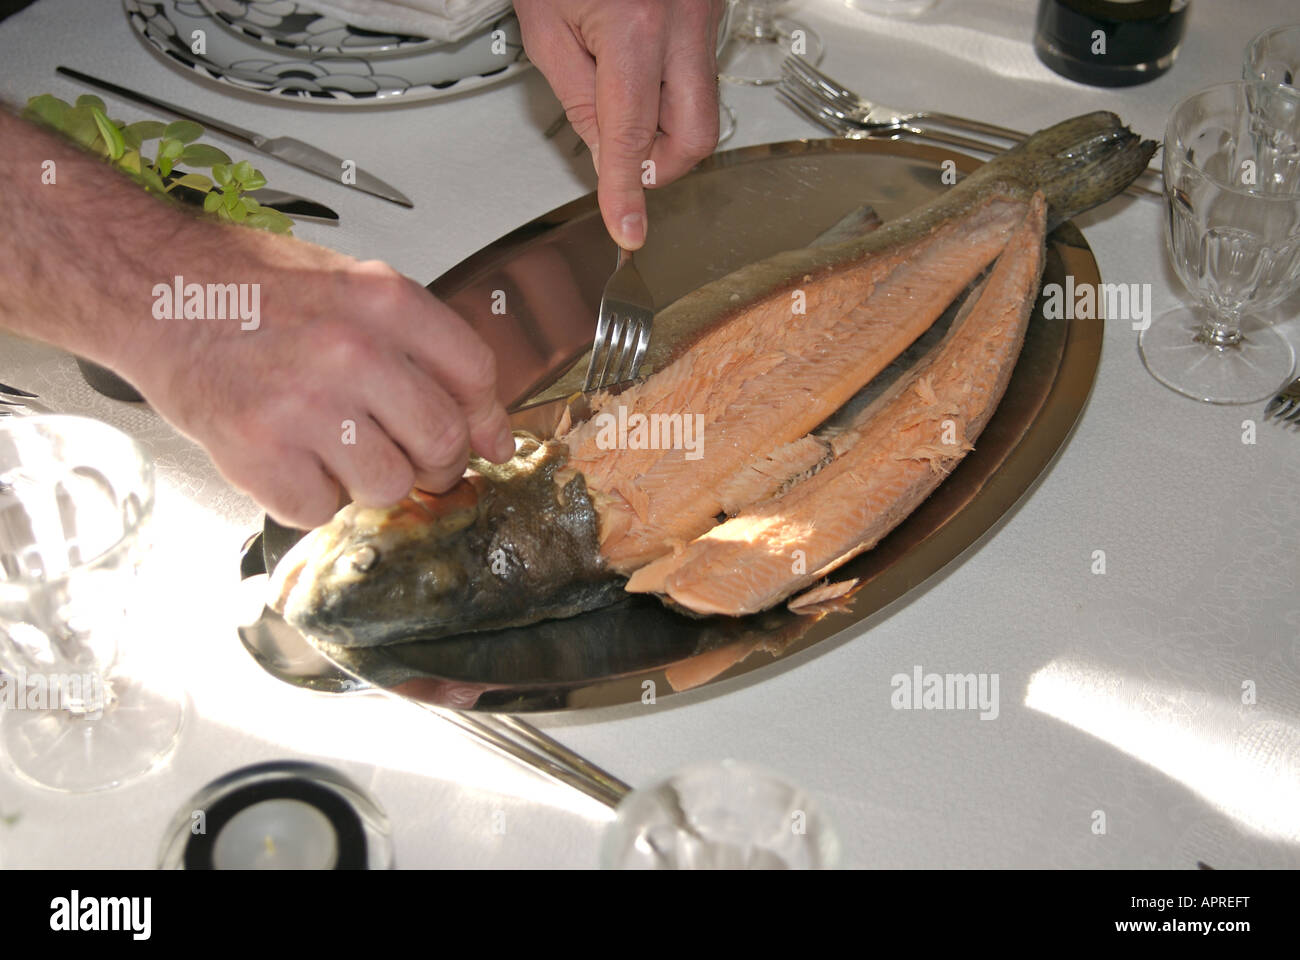 Carving / filleting a whole cooked trout fish at the dining table Stock Photo